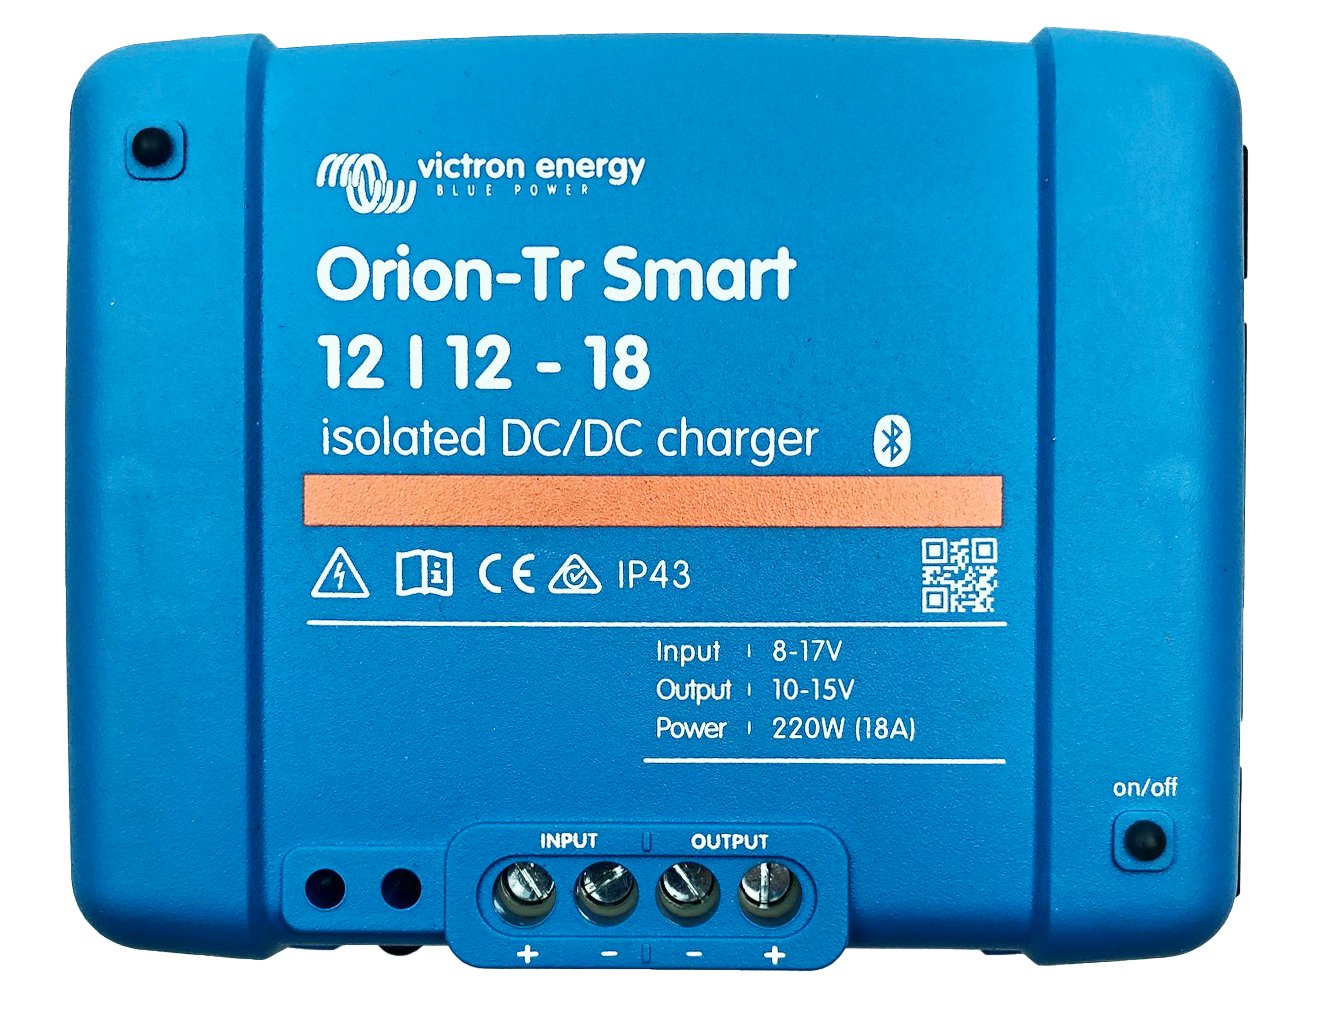 Does the Orion charger still work if the input voltage drops below the lock-out value?